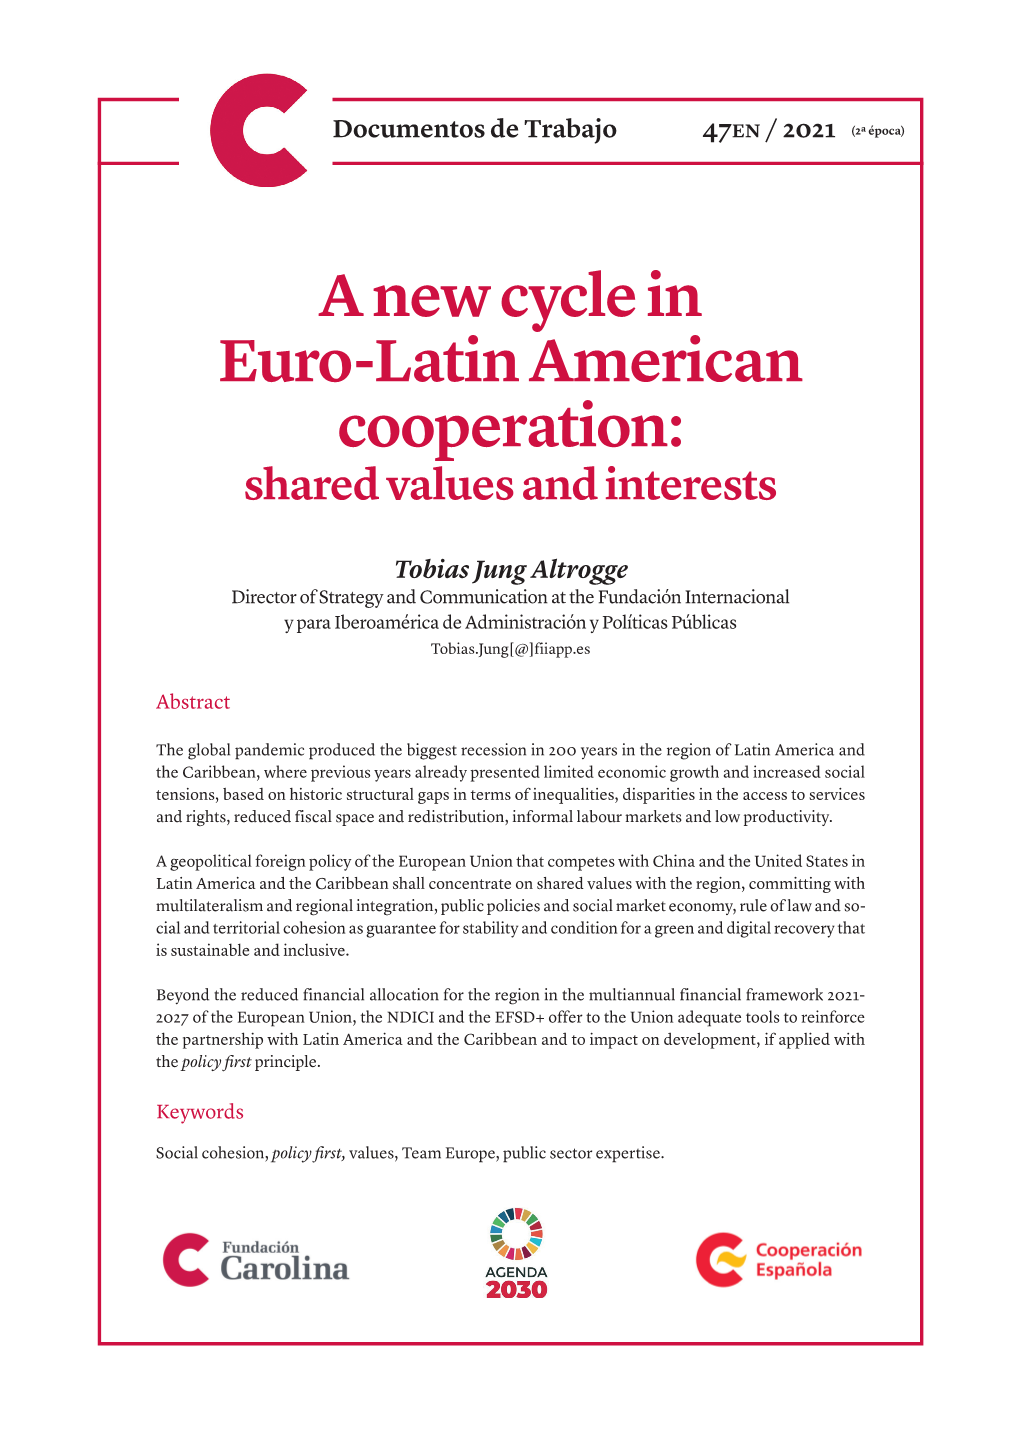 A New Cycle in Euro-Latin American Cooperation: Shared Values and Interests